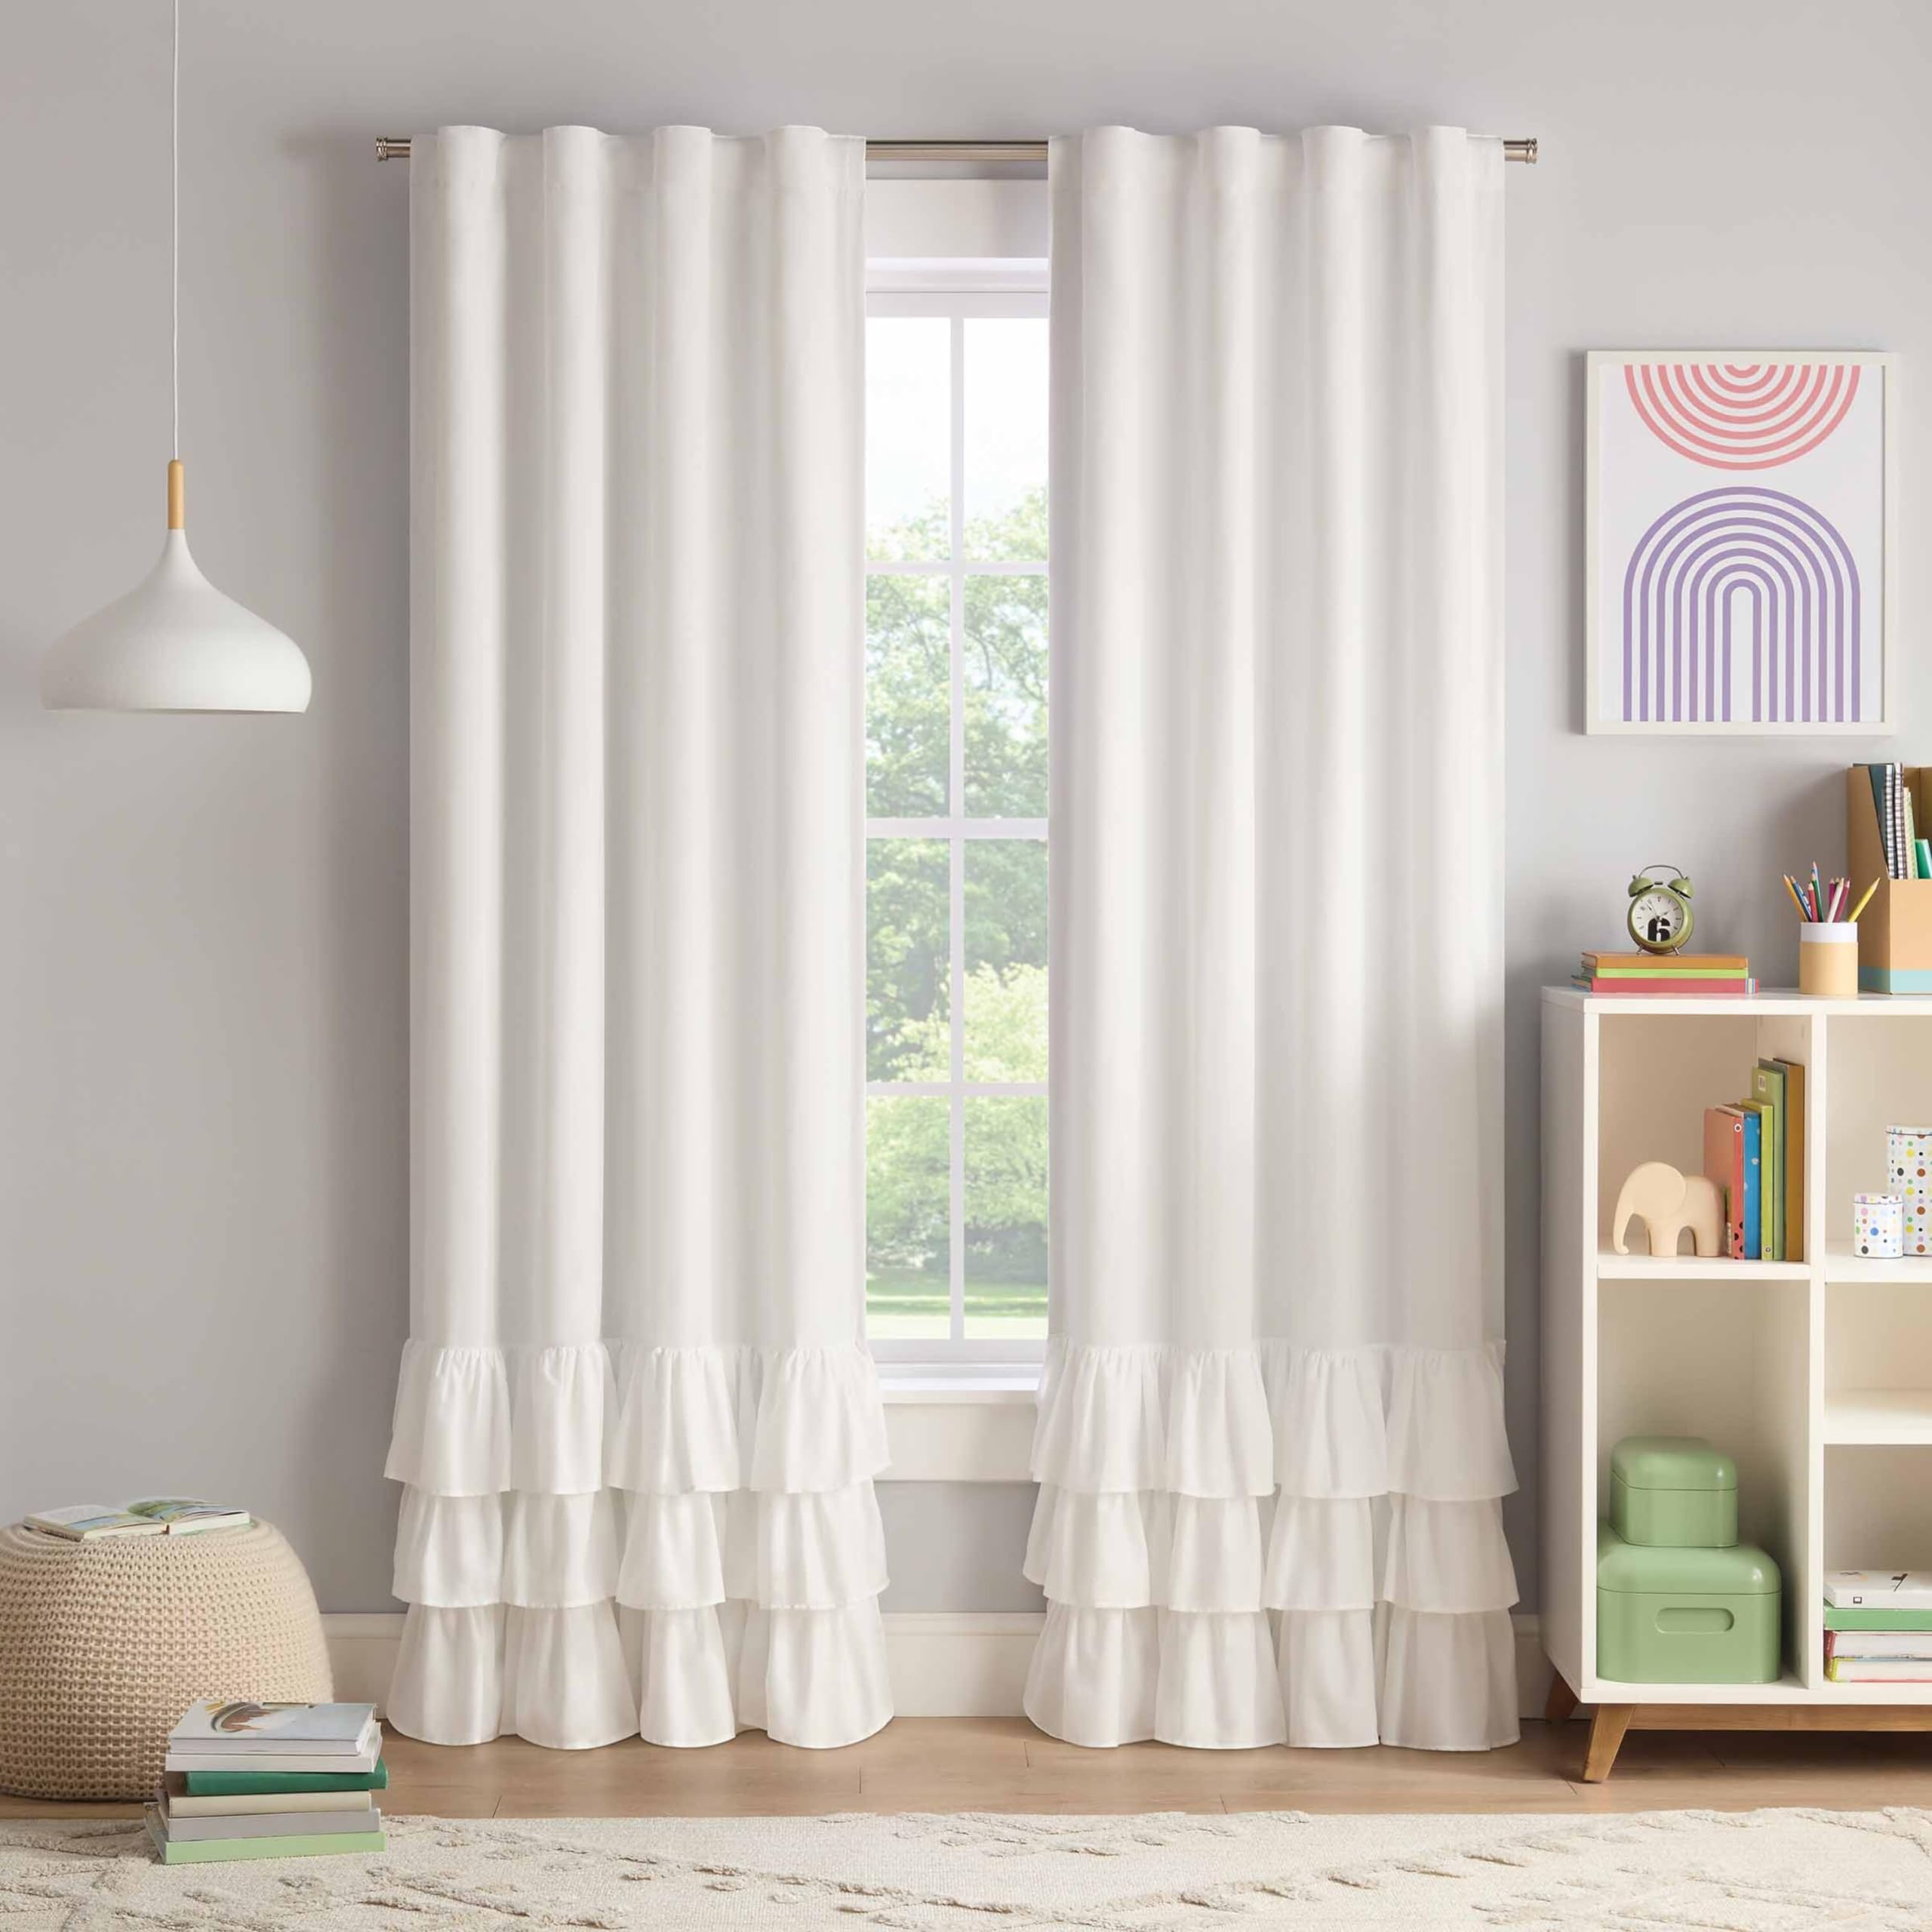 Eclipse Blackout Curtains, Tiered Ruffle Kids Curtains, 84 in x 40 in, Thermaback 100% Blackout Curtains with Rod Pocket Header, Curtains for Kids Room or Playroom, 1 Window Curtain, White